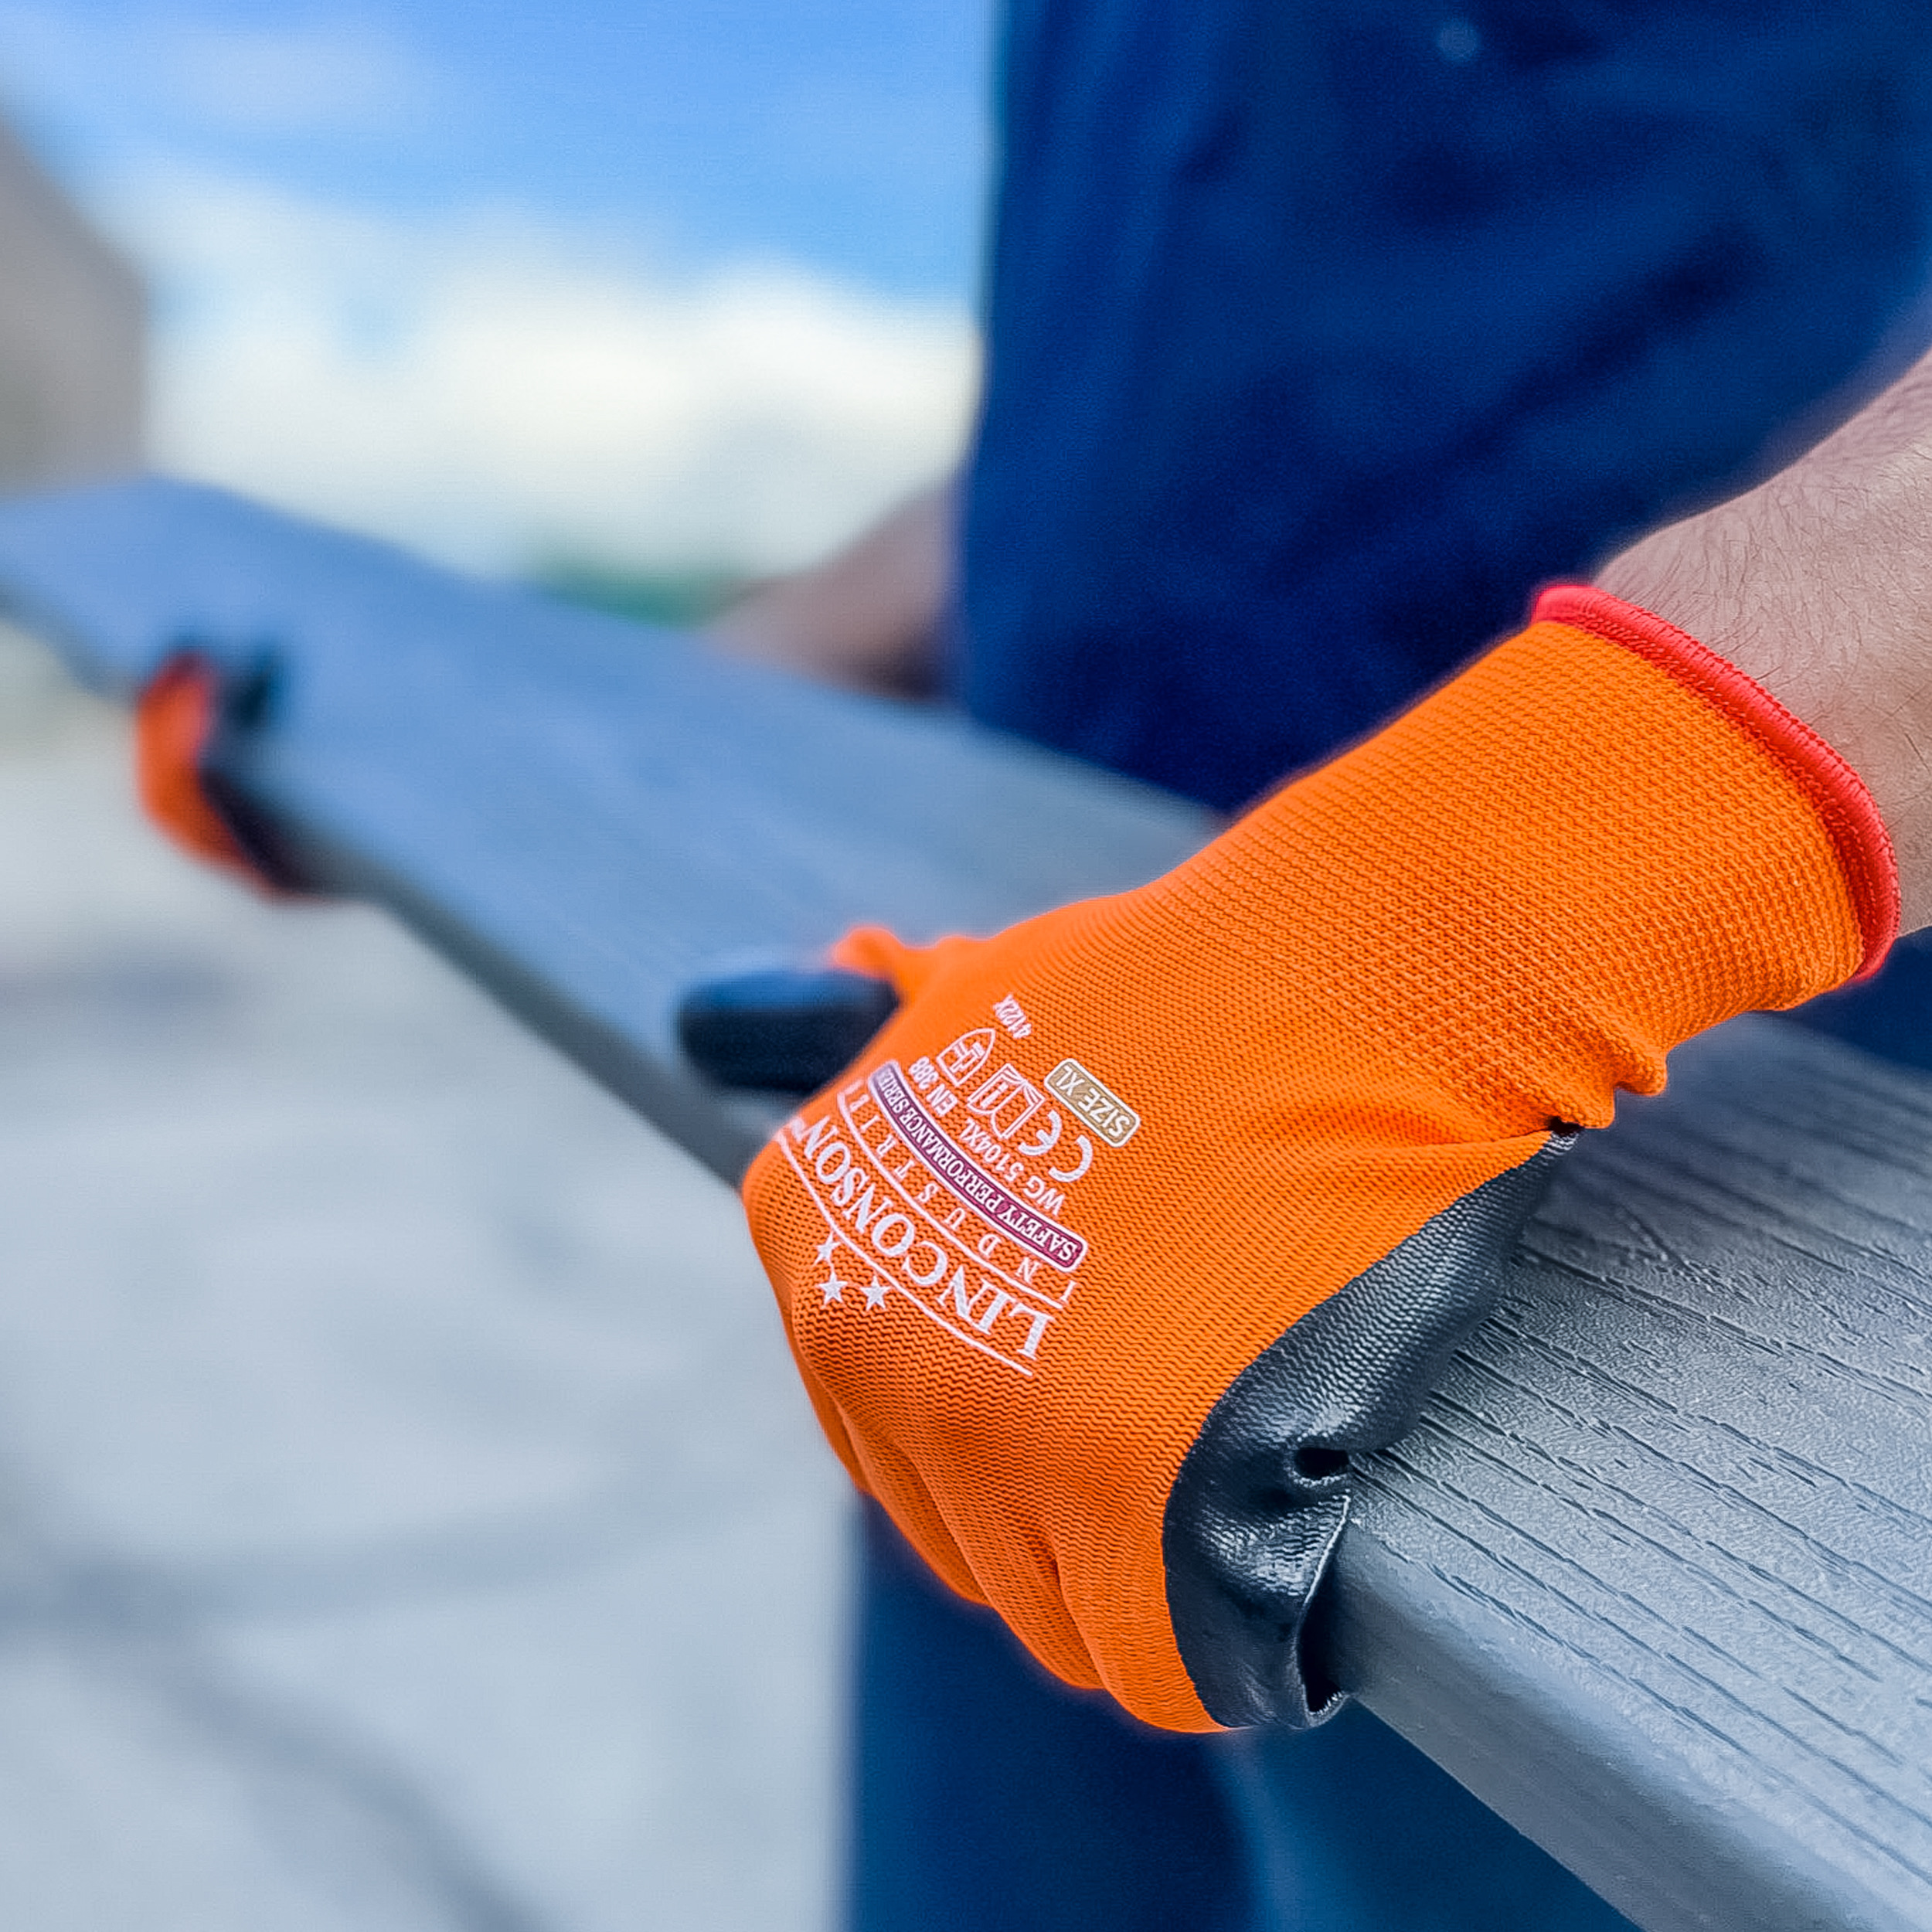 Cotton Wrinkle latex coated construction work gloves - Linconson™